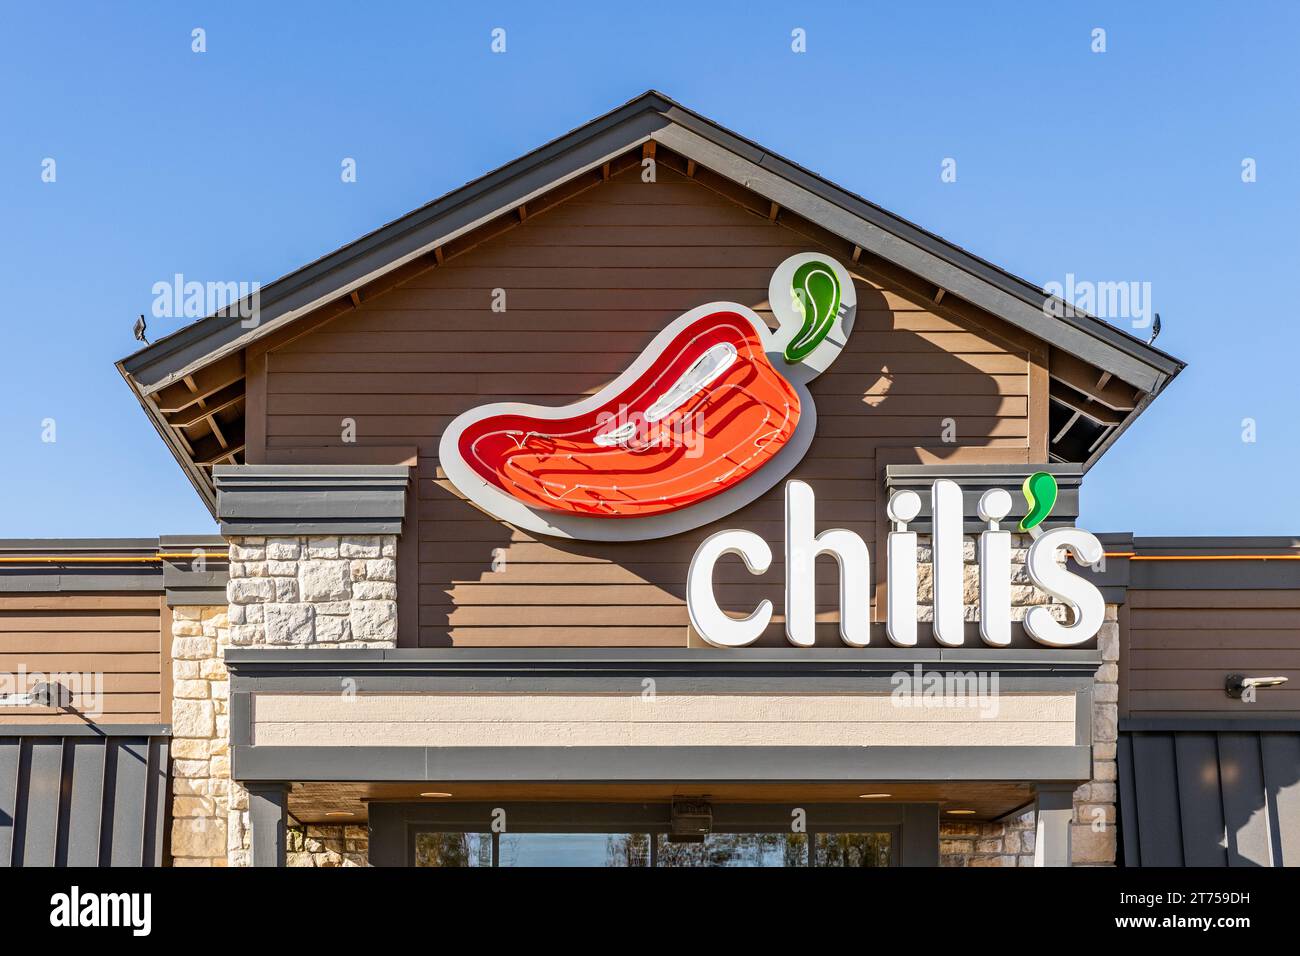 https://c8.alamy.com/comp/2T759DH/chilis-bar-and-grill-is-an-american-casual-restaurant-chain-created-in-1975-with-over-1600-locations-2T759DH.jpg